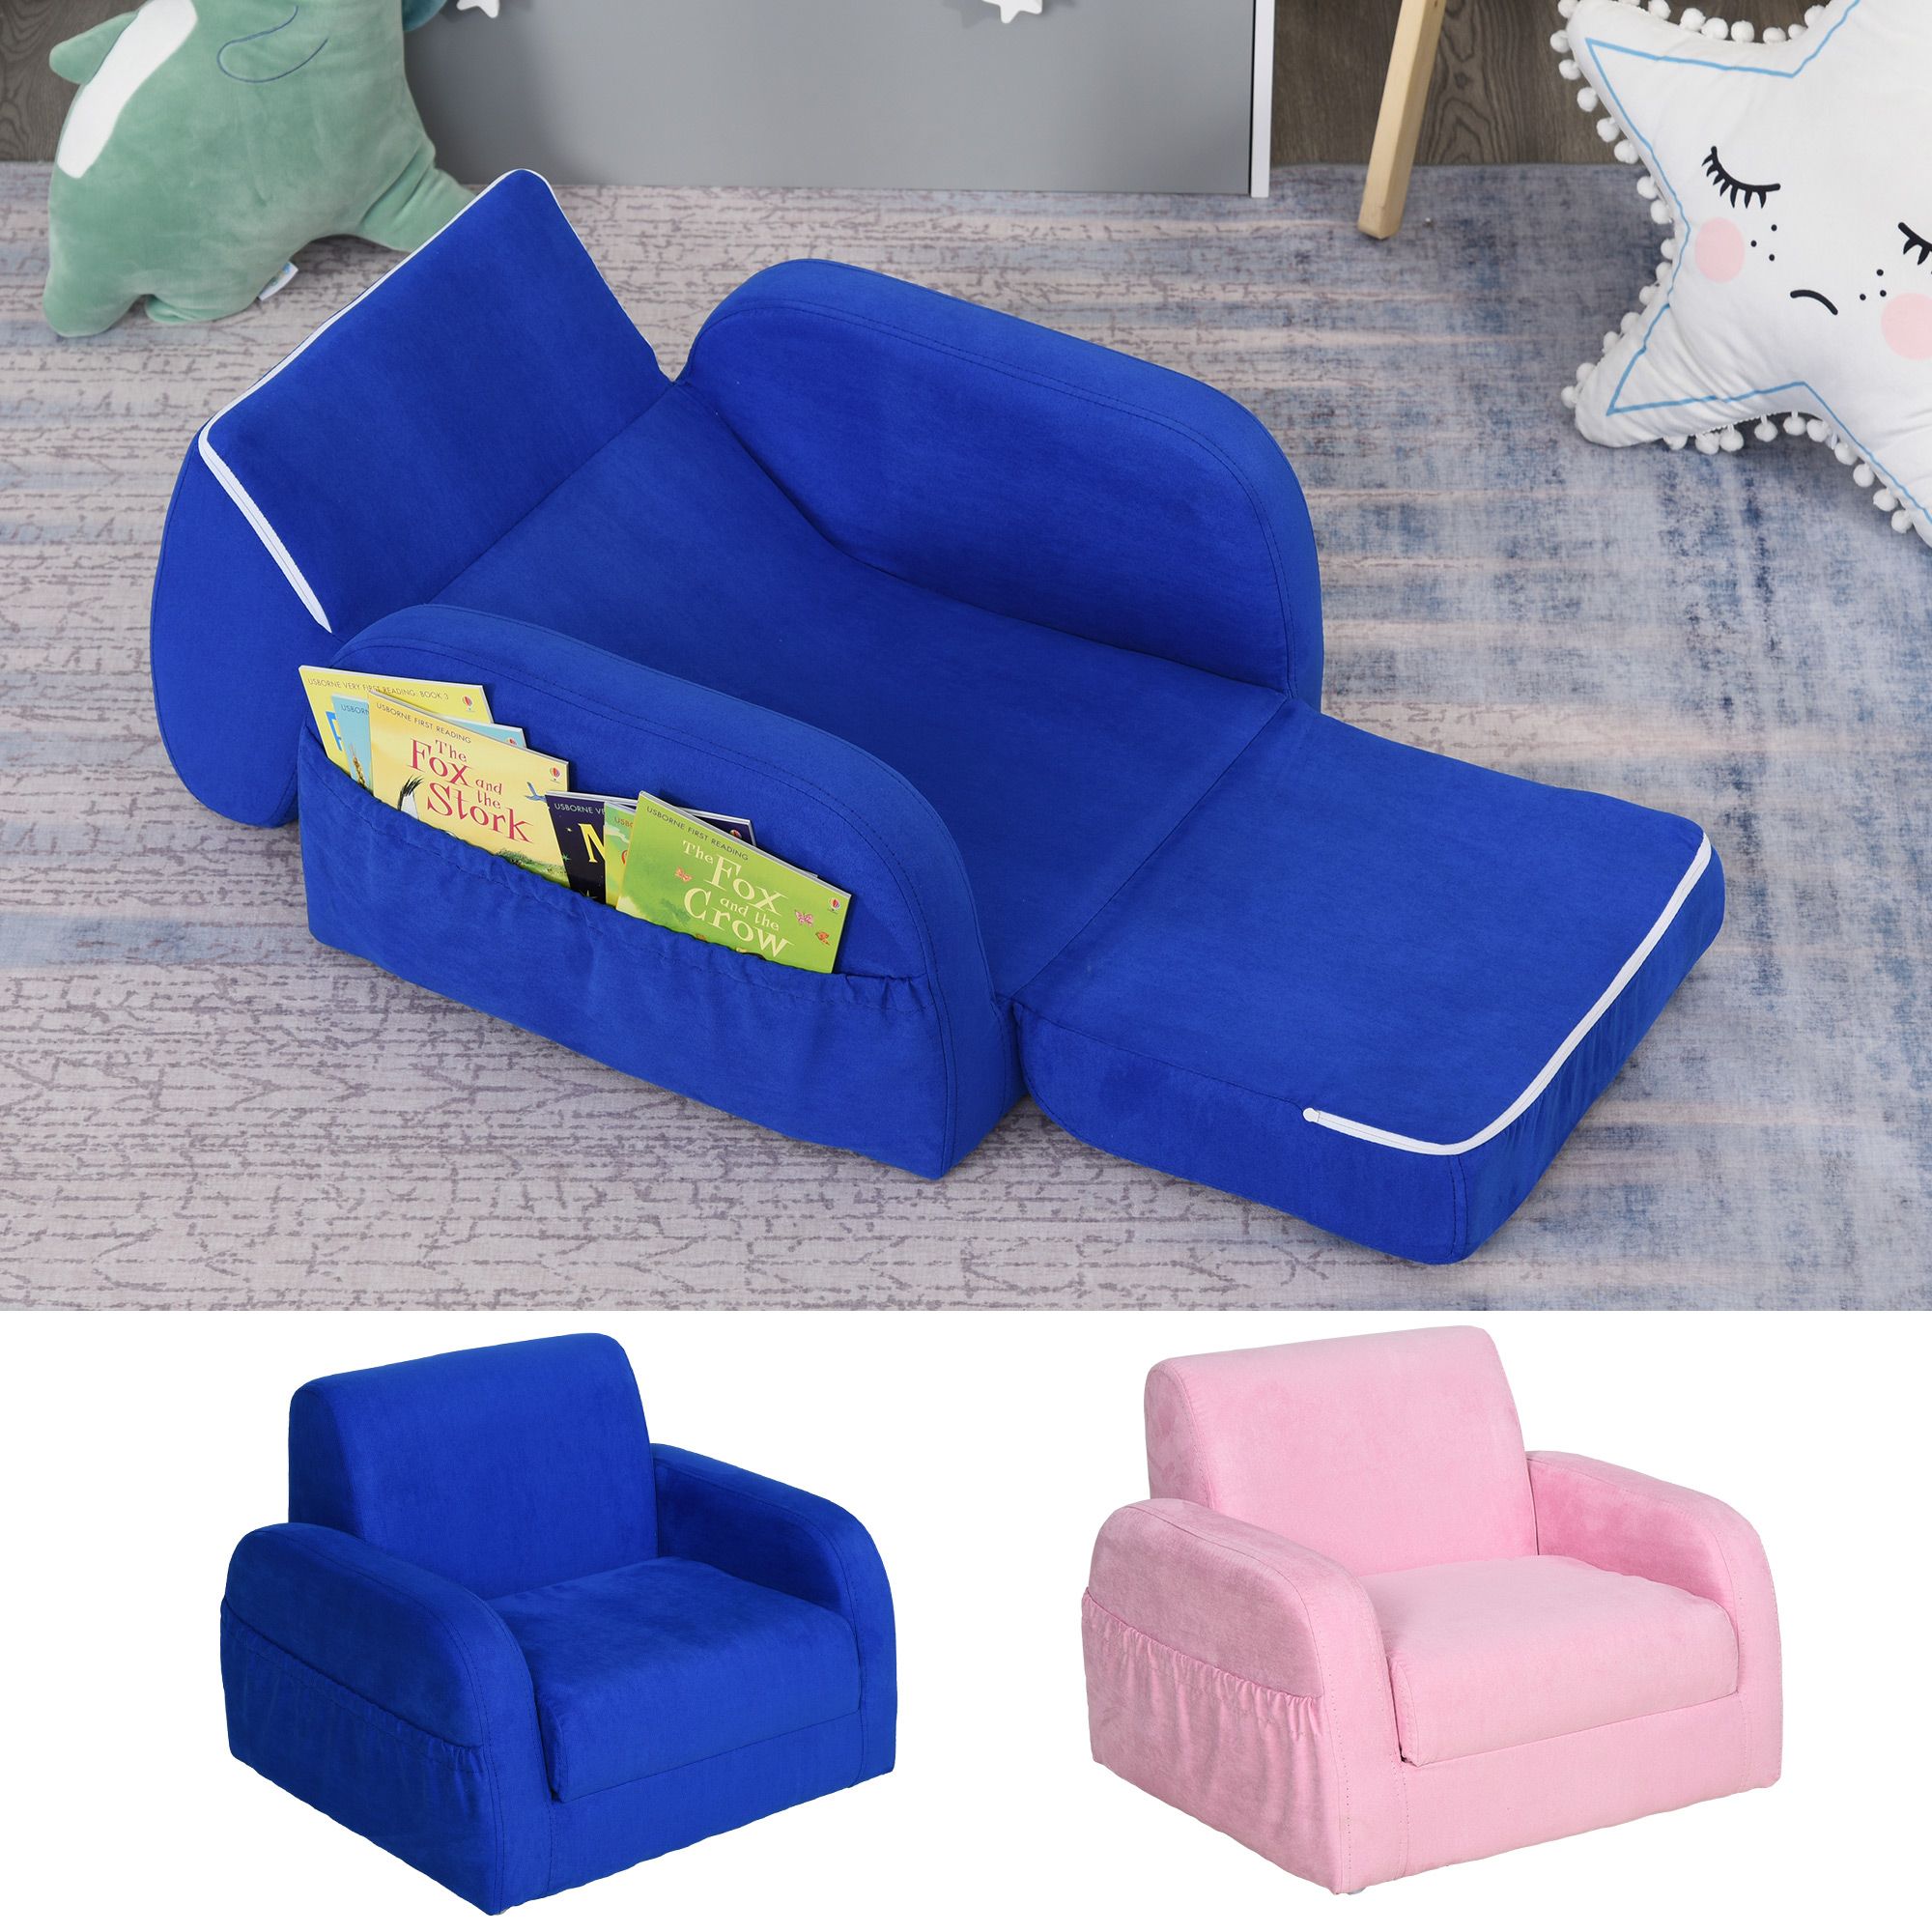 2 In 1 Kids Sofa Armchair Chair Fold Out Flip Open Baby Bed Couch Regarding Children's Sofa Beds (View 3 of 20)